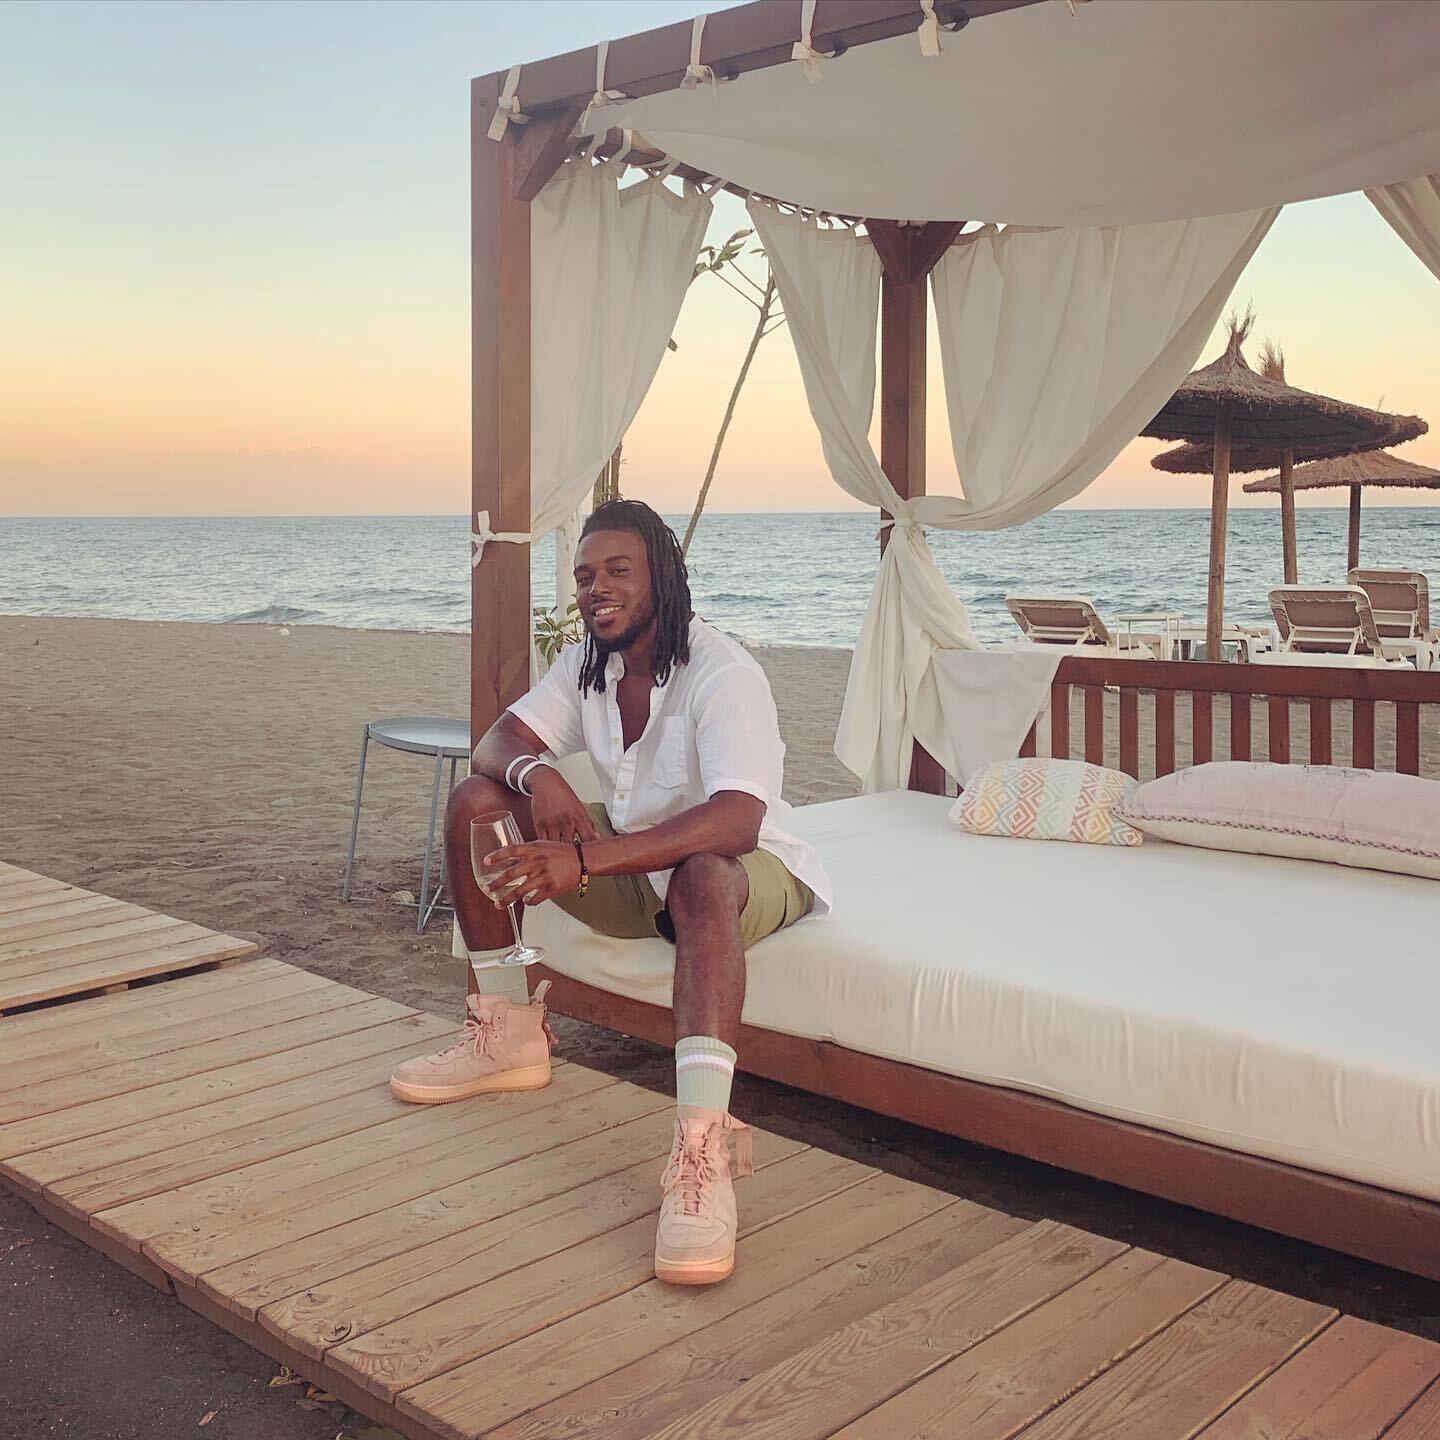 Black man sitting on a luxurious wooden beach bed with the calm spanish sea and gradient evening sky as a backdrop